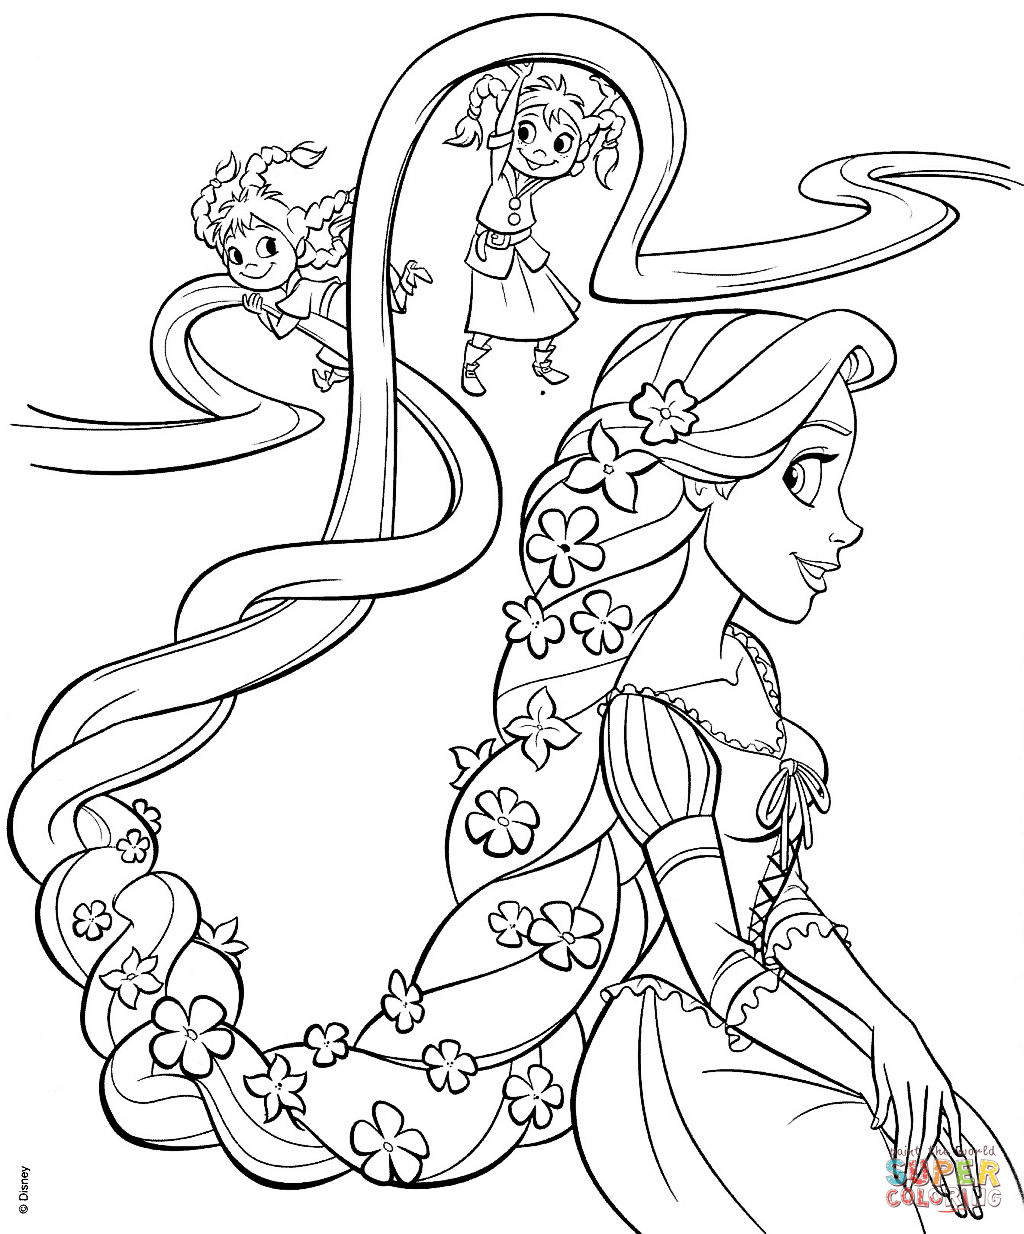 Rapunzel and Four Sisters coloring page | Free Printable Coloring Pages